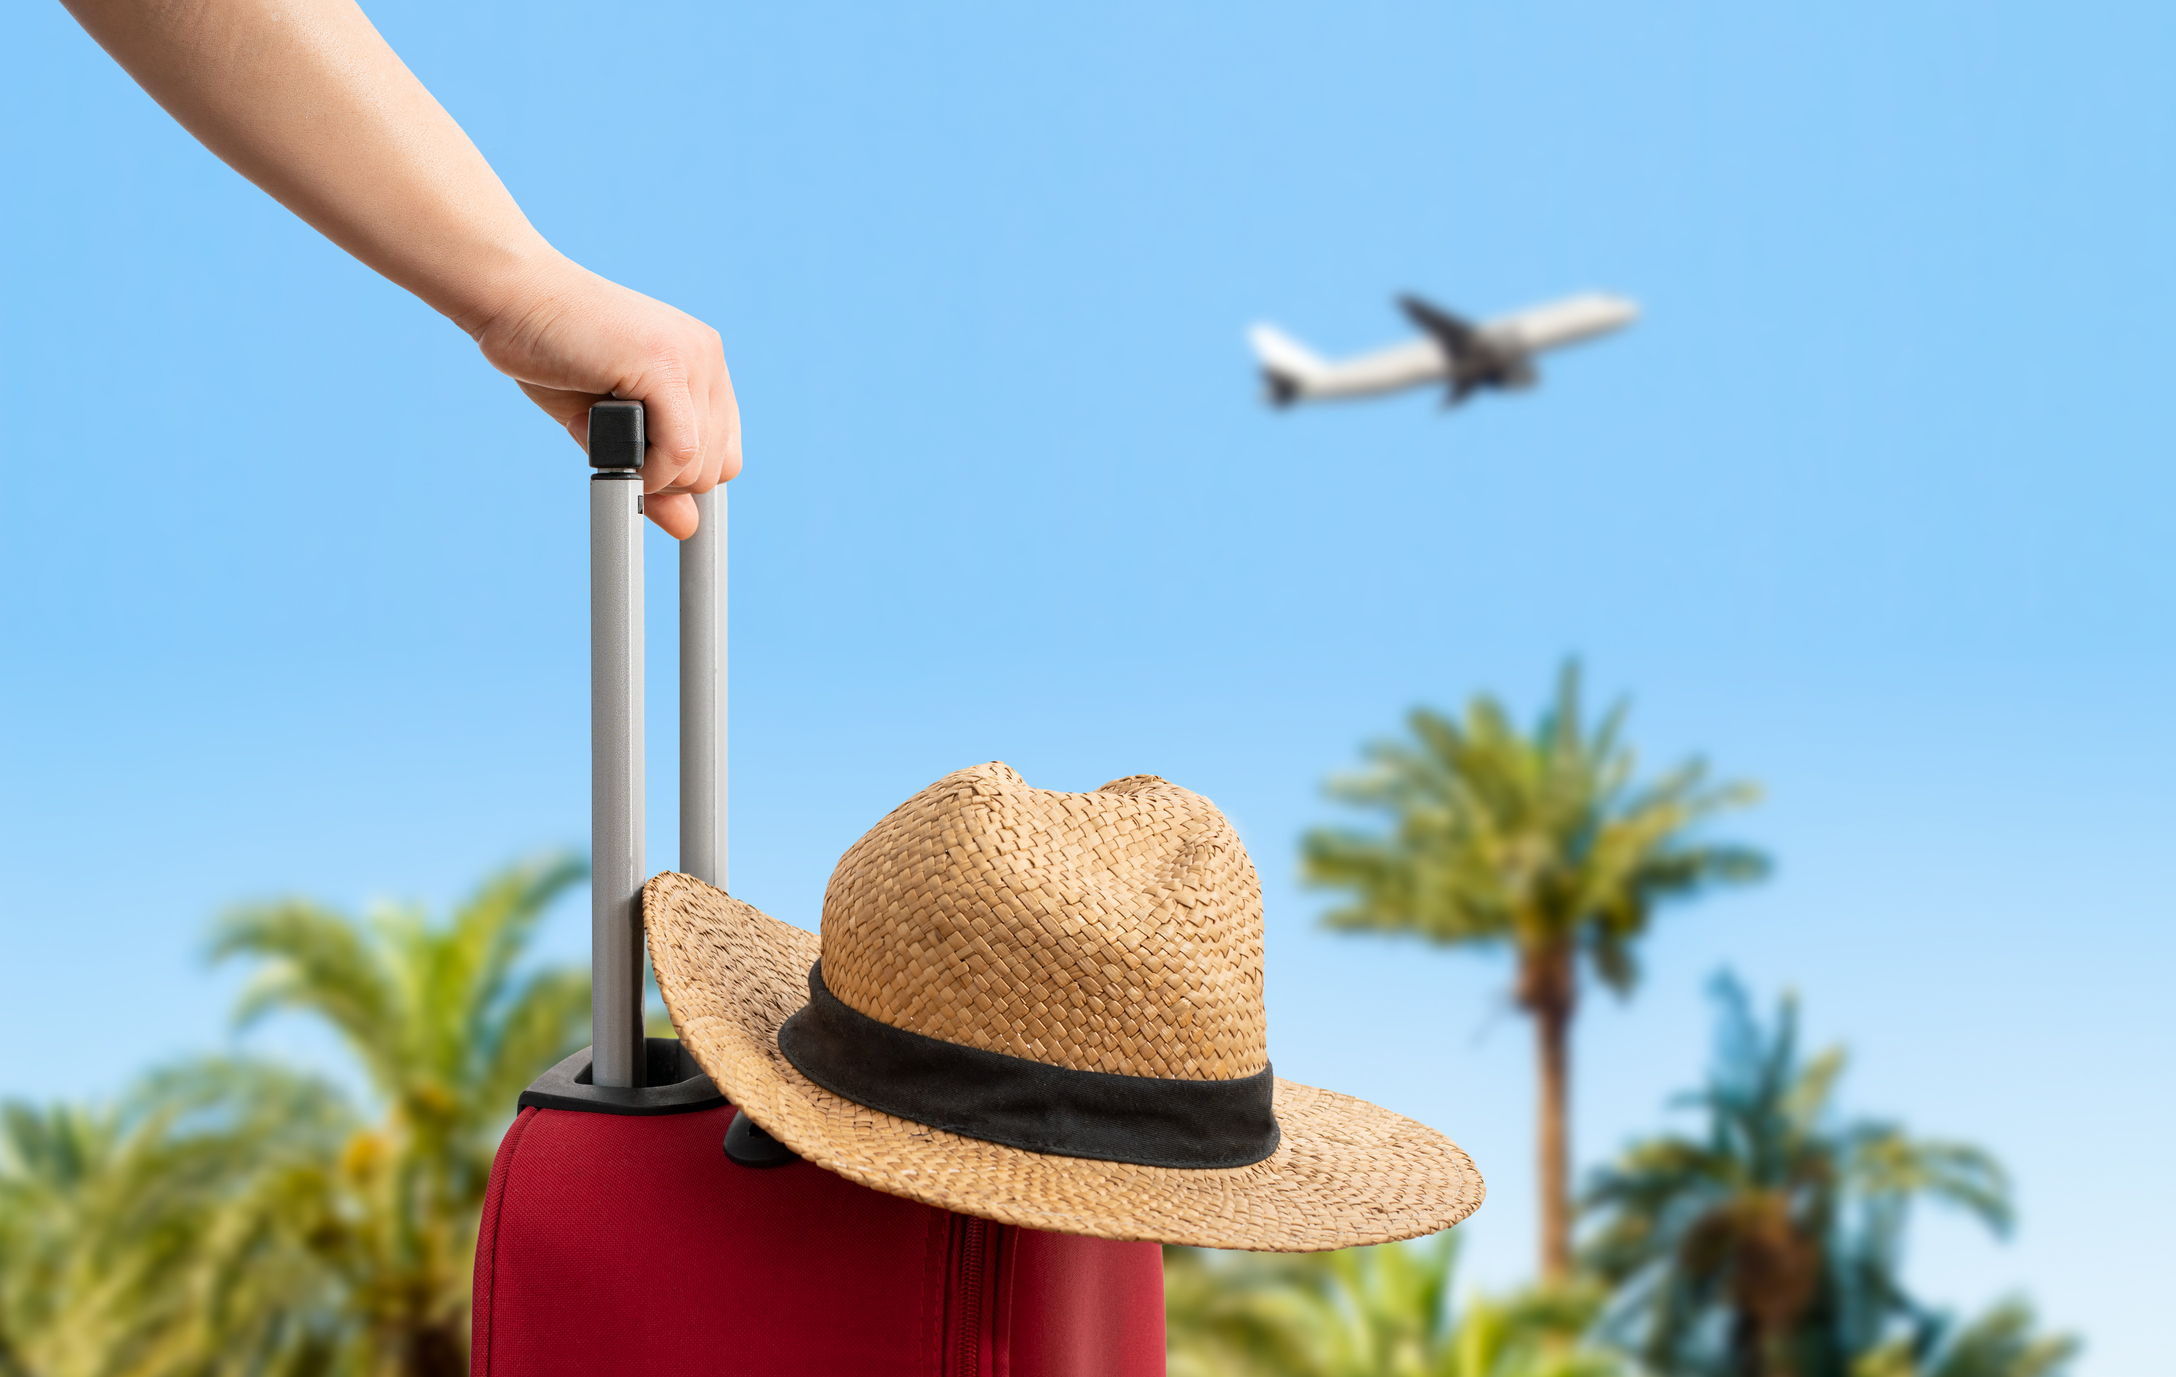 Suitcase with a sun hat and an airplane in the background